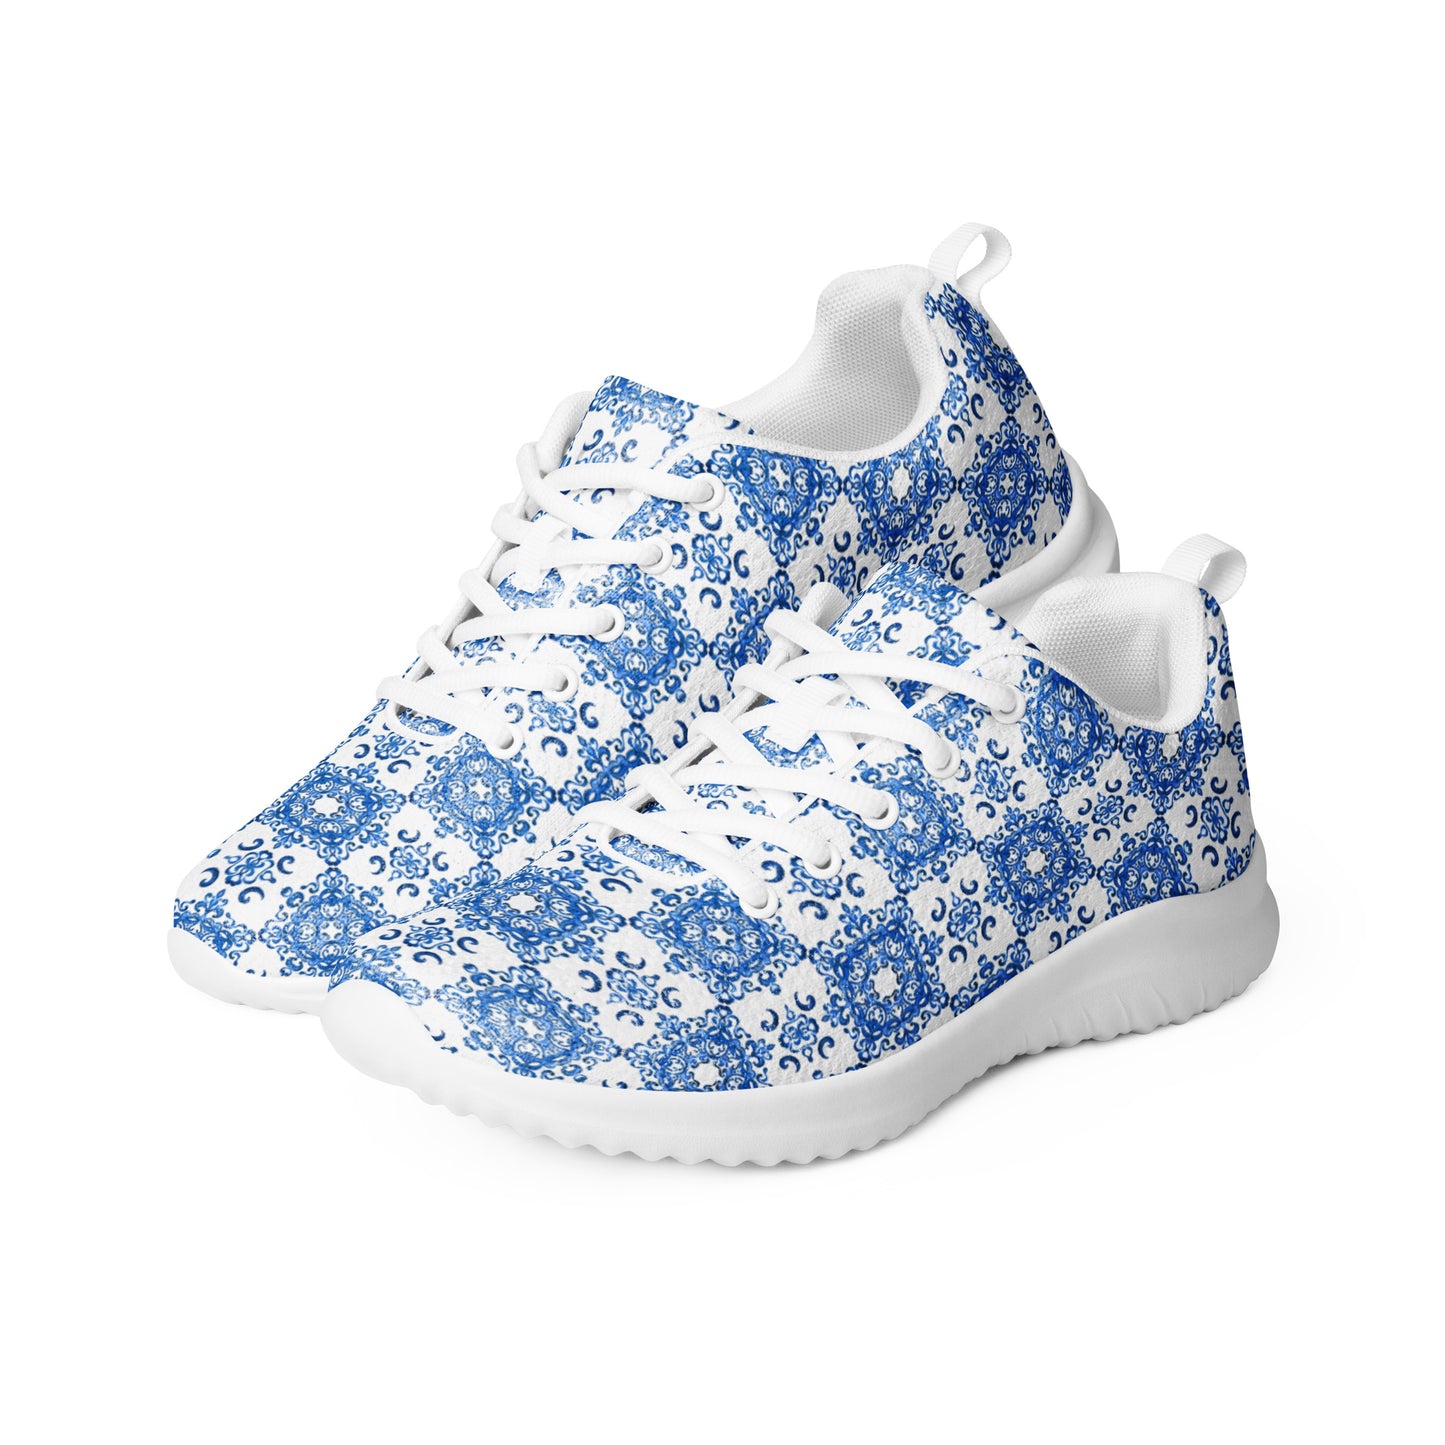 Portugal Tiles Women’s Trainers